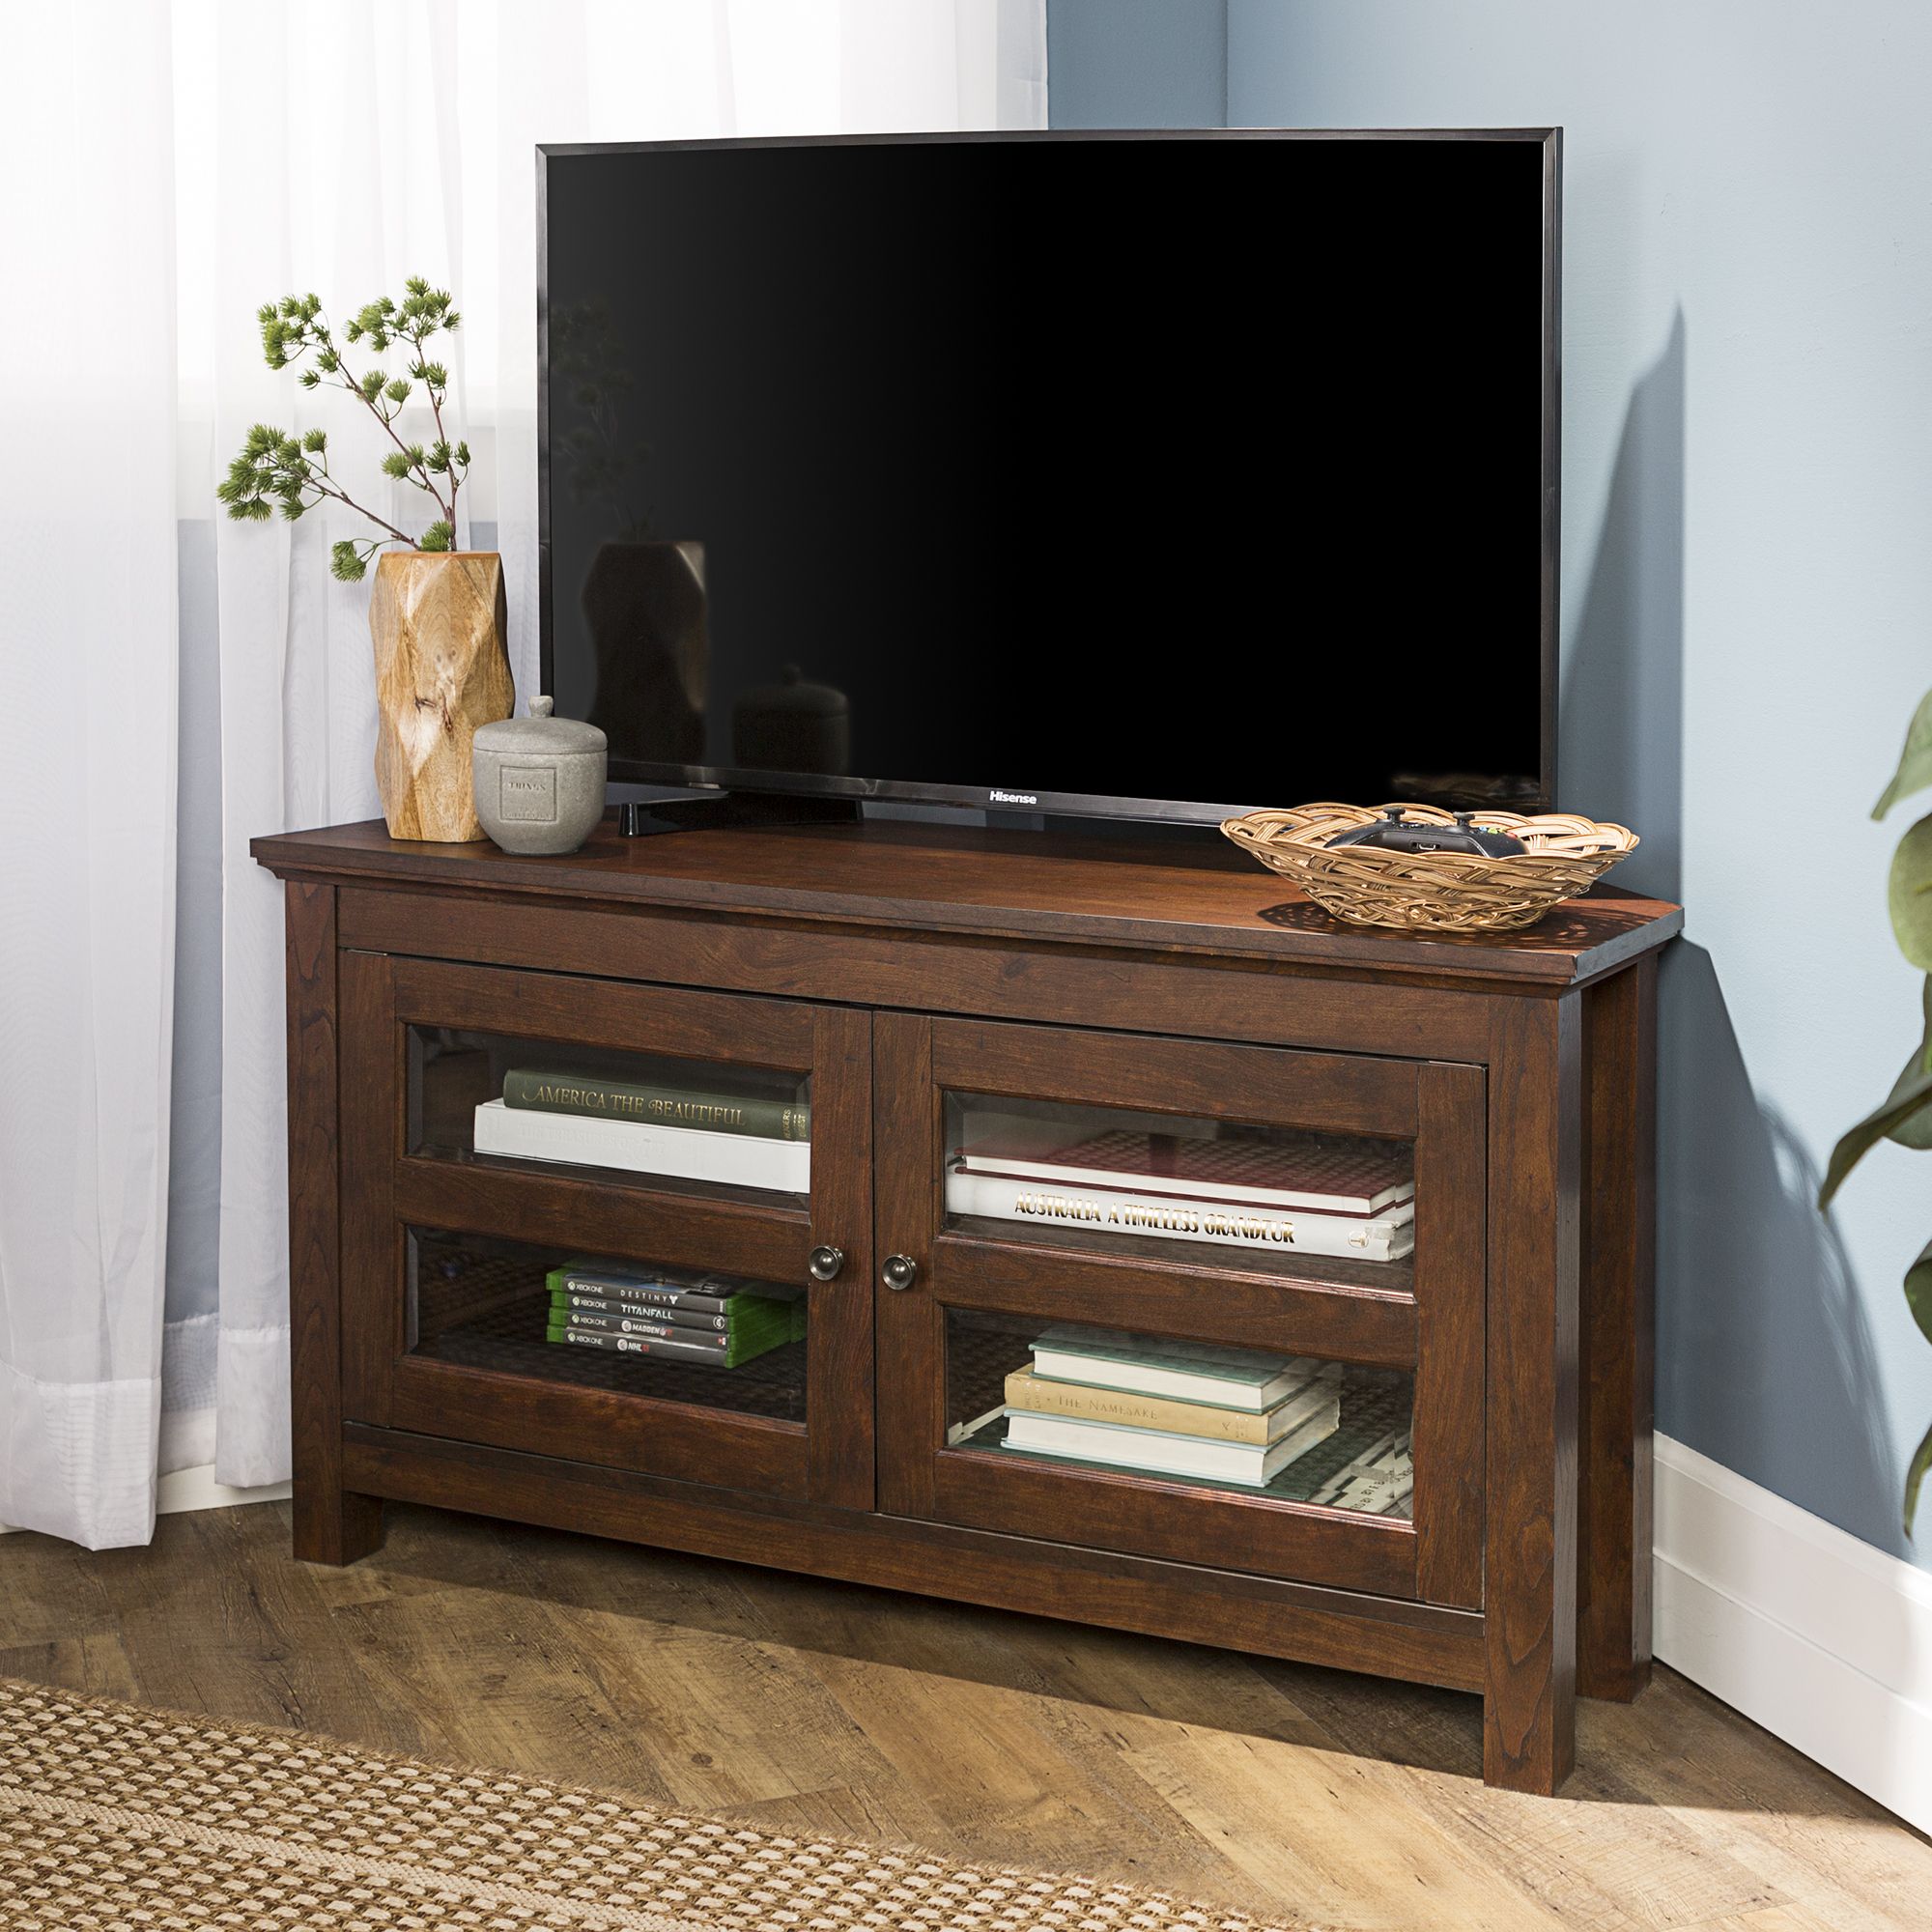 Wood Corner Media Storage Console Tv Stand For Tvs Up To Intended For Camden Corner Tv Stands For Tvs Up To 50" (View 13 of 15)